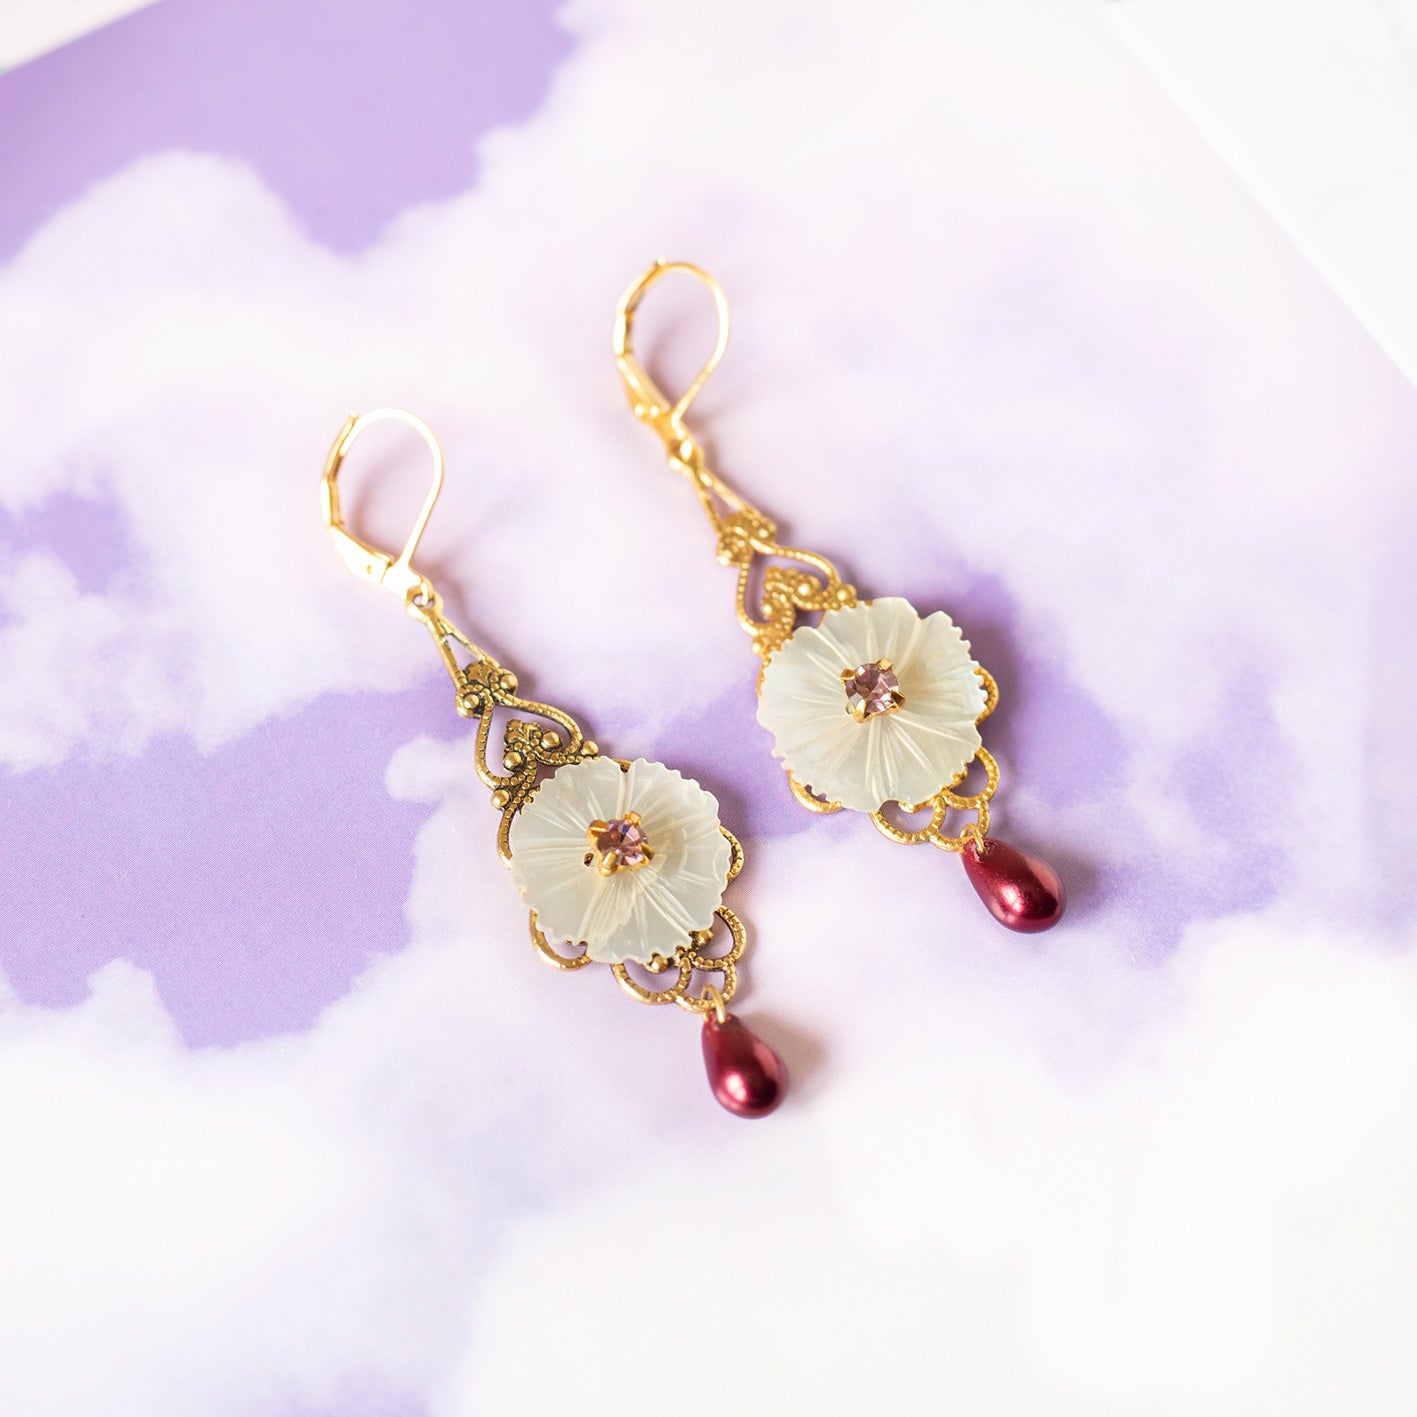 Earrings with vintage baroque prints and white mother-of-pearl buttons